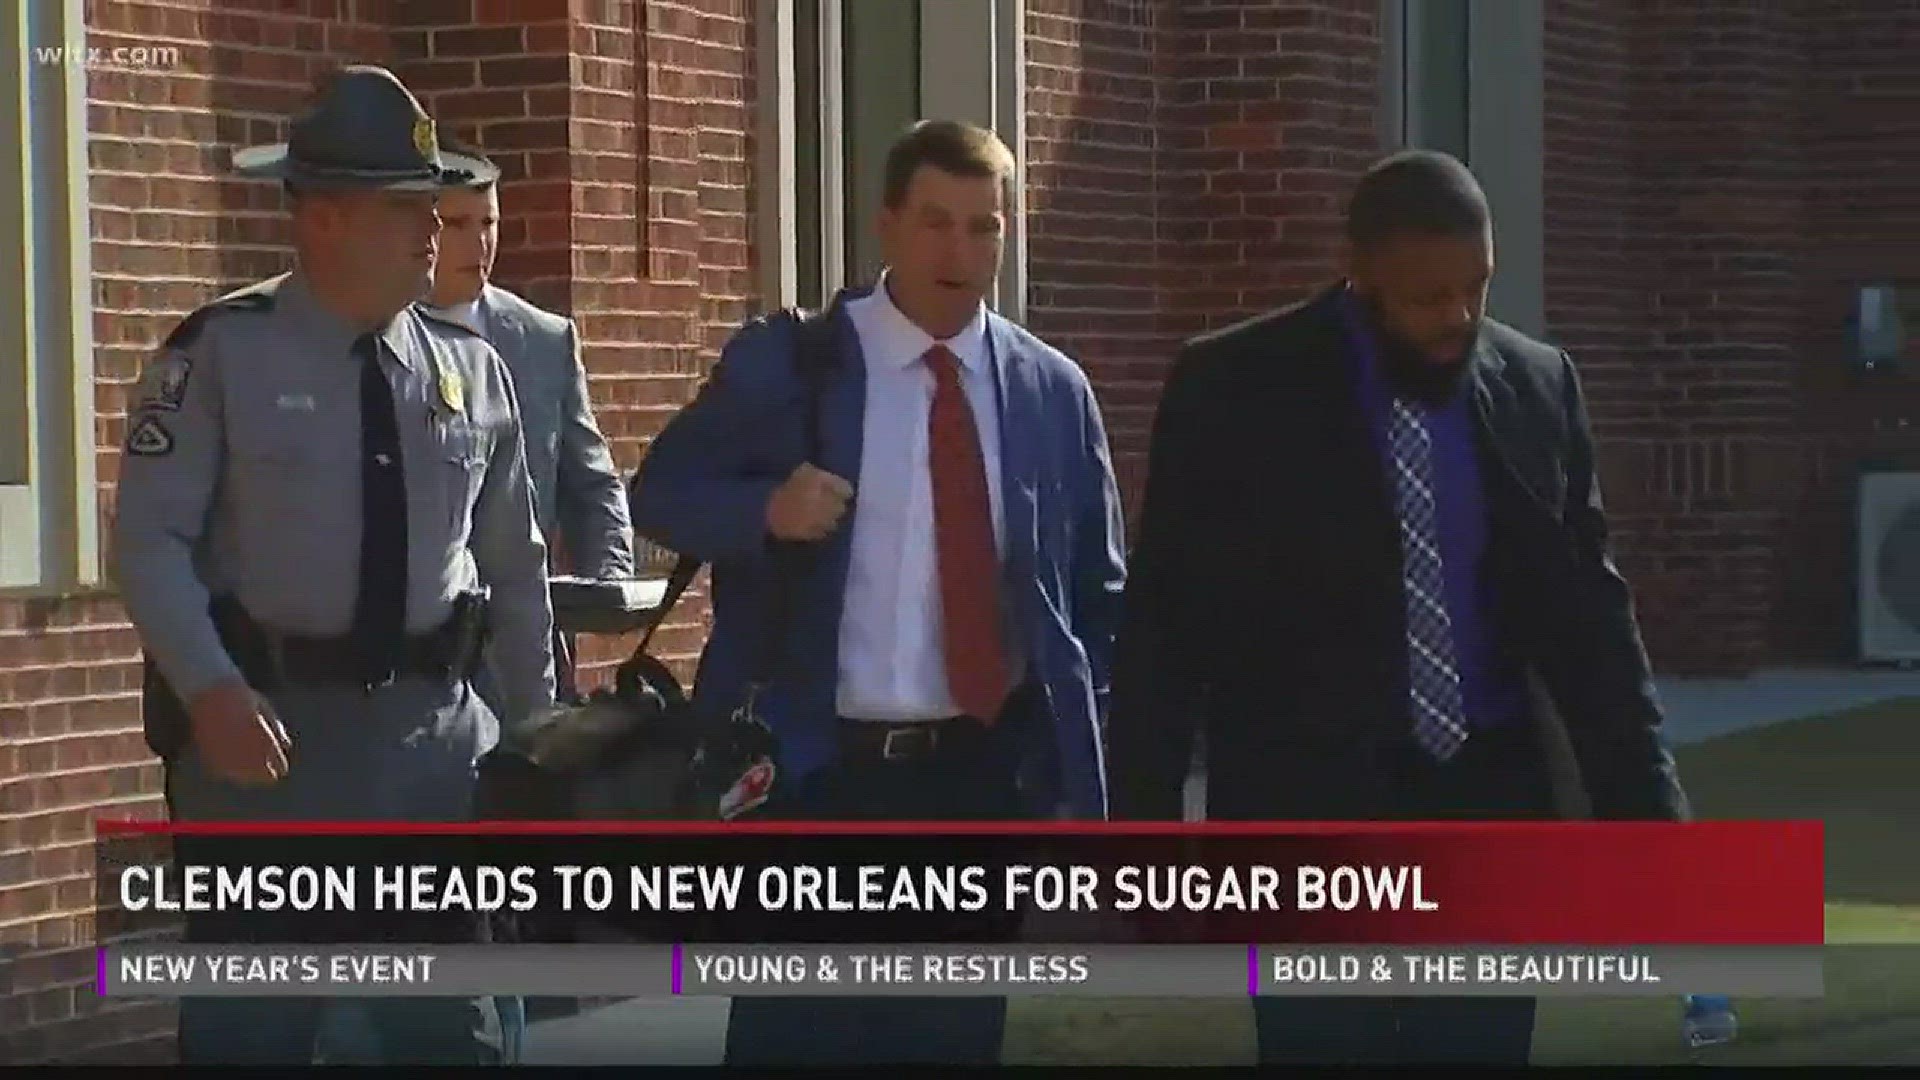 The defending national champions are waking up in New Orleans as they prepare to face Alabama in the Sugar Bowl.